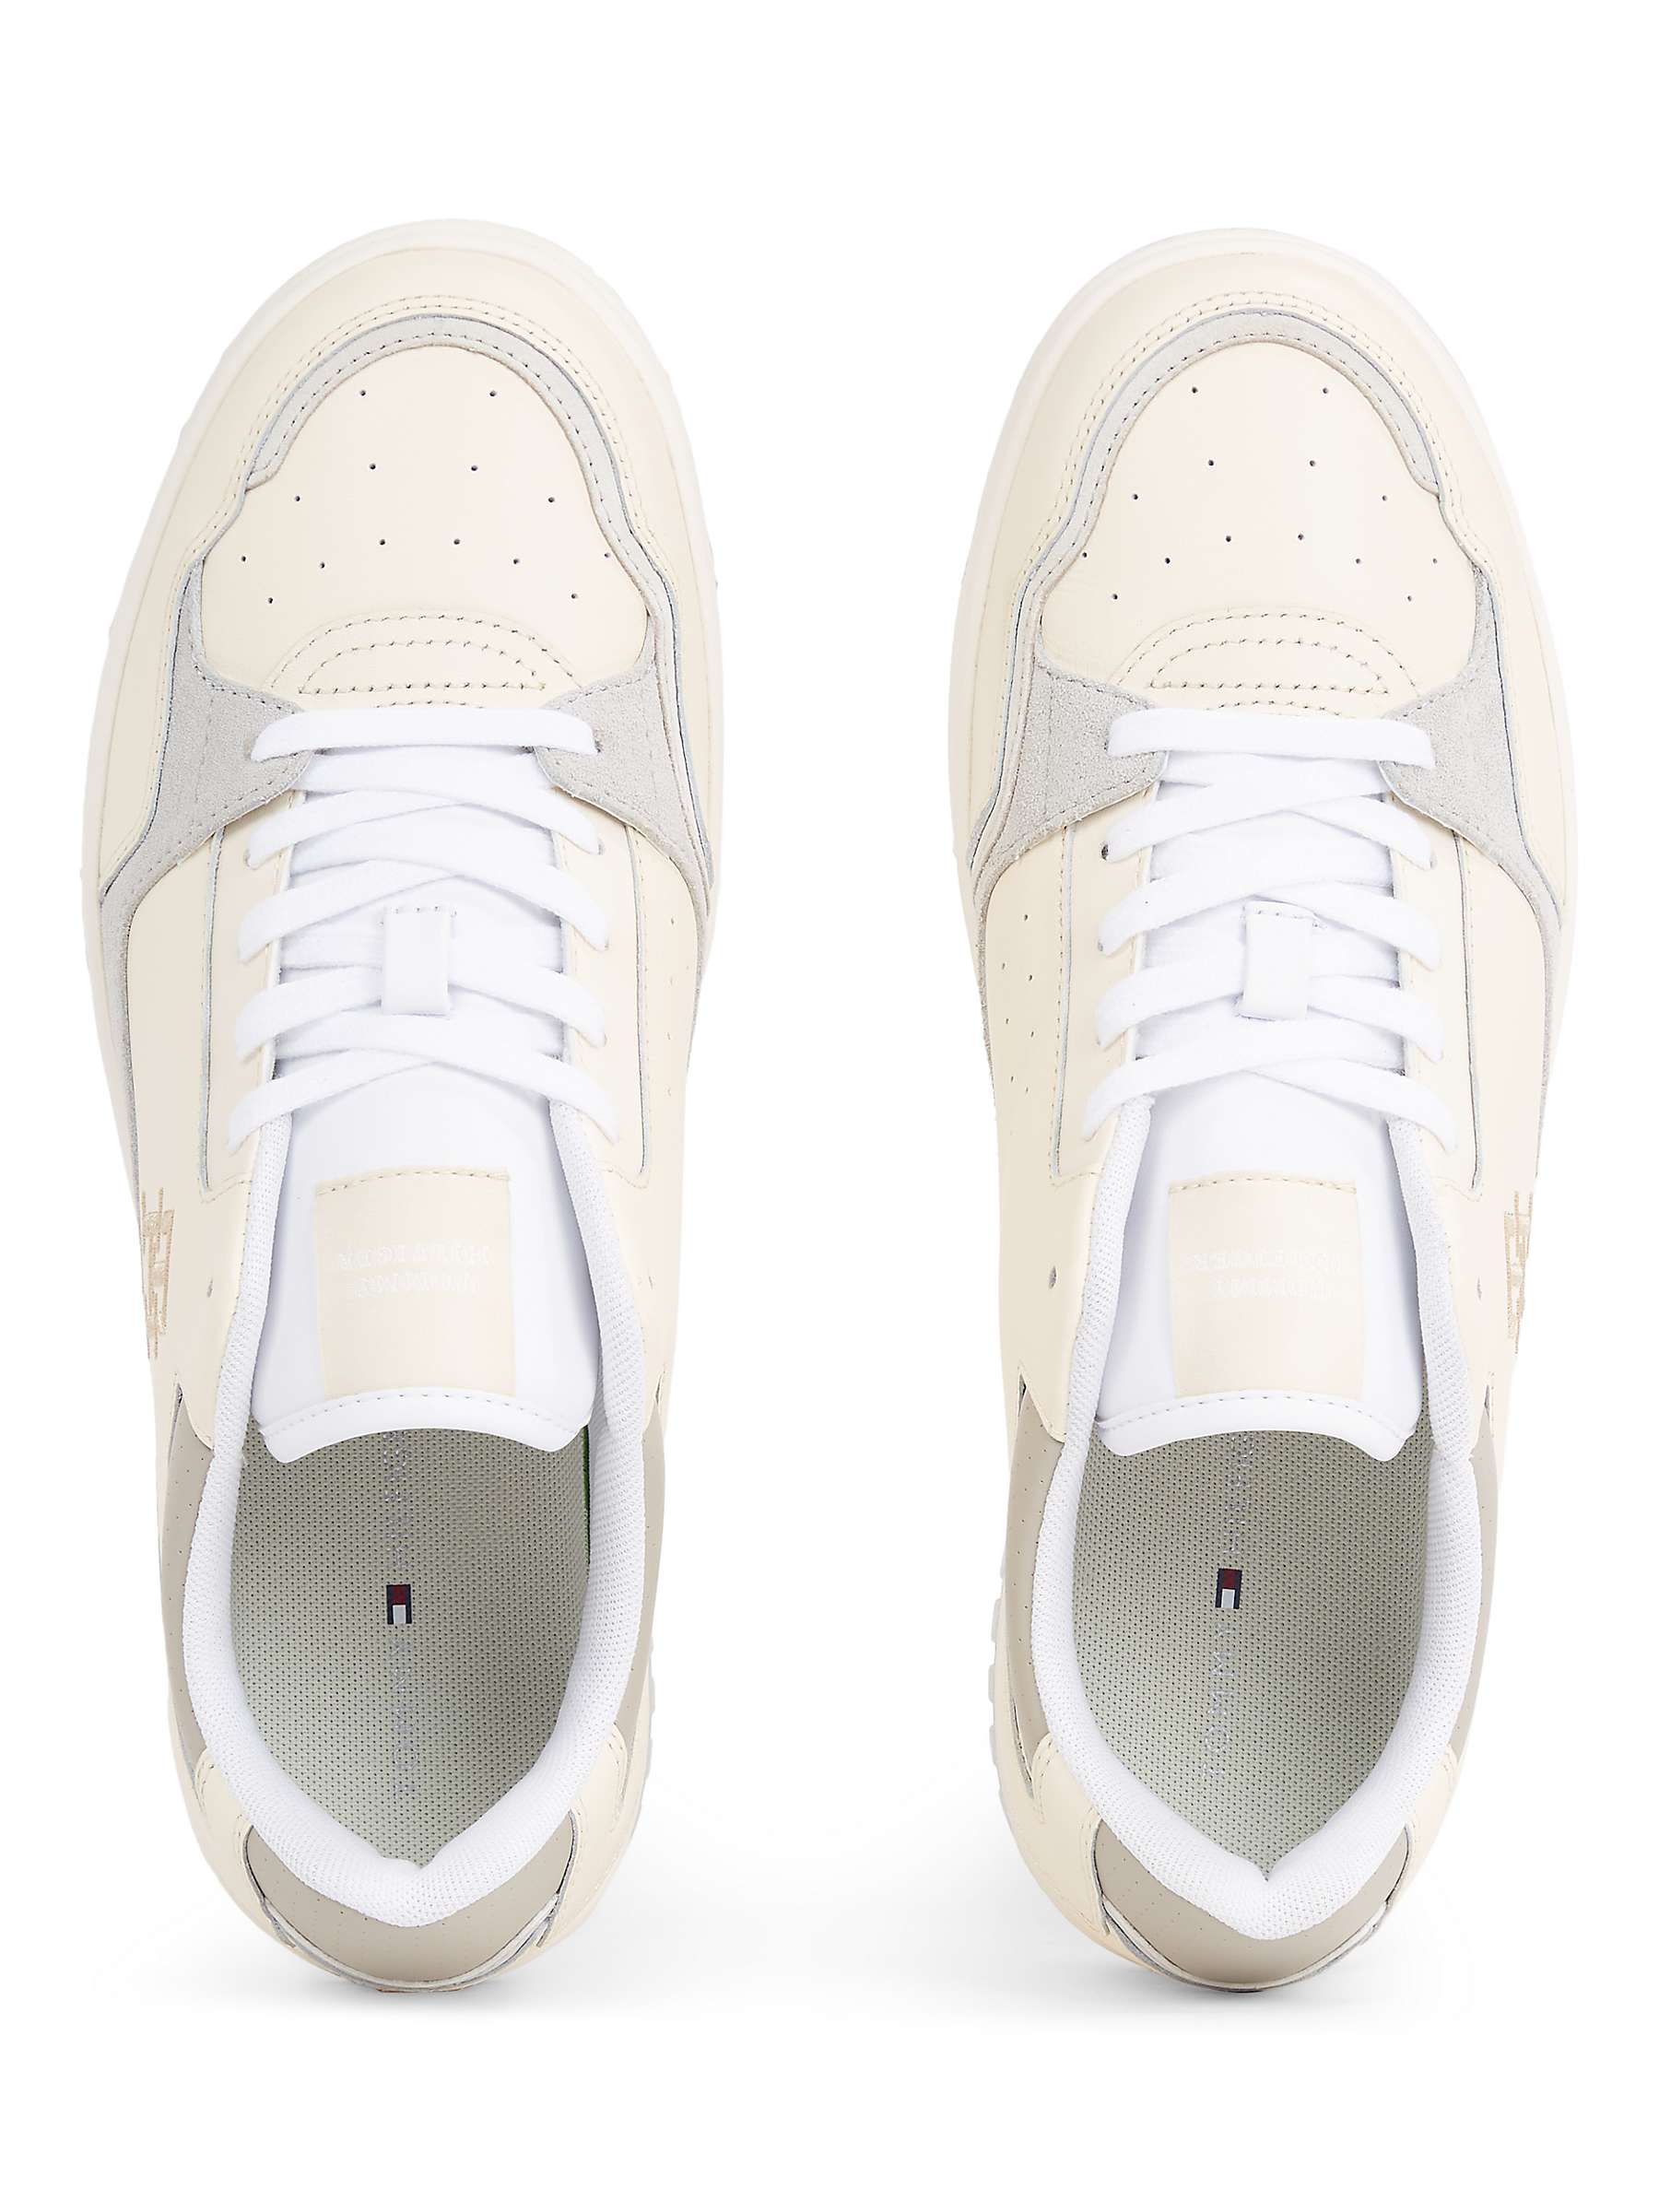 Buy Tommy Hilfiger Leather Street Trainers, Calico Online at johnlewis.com